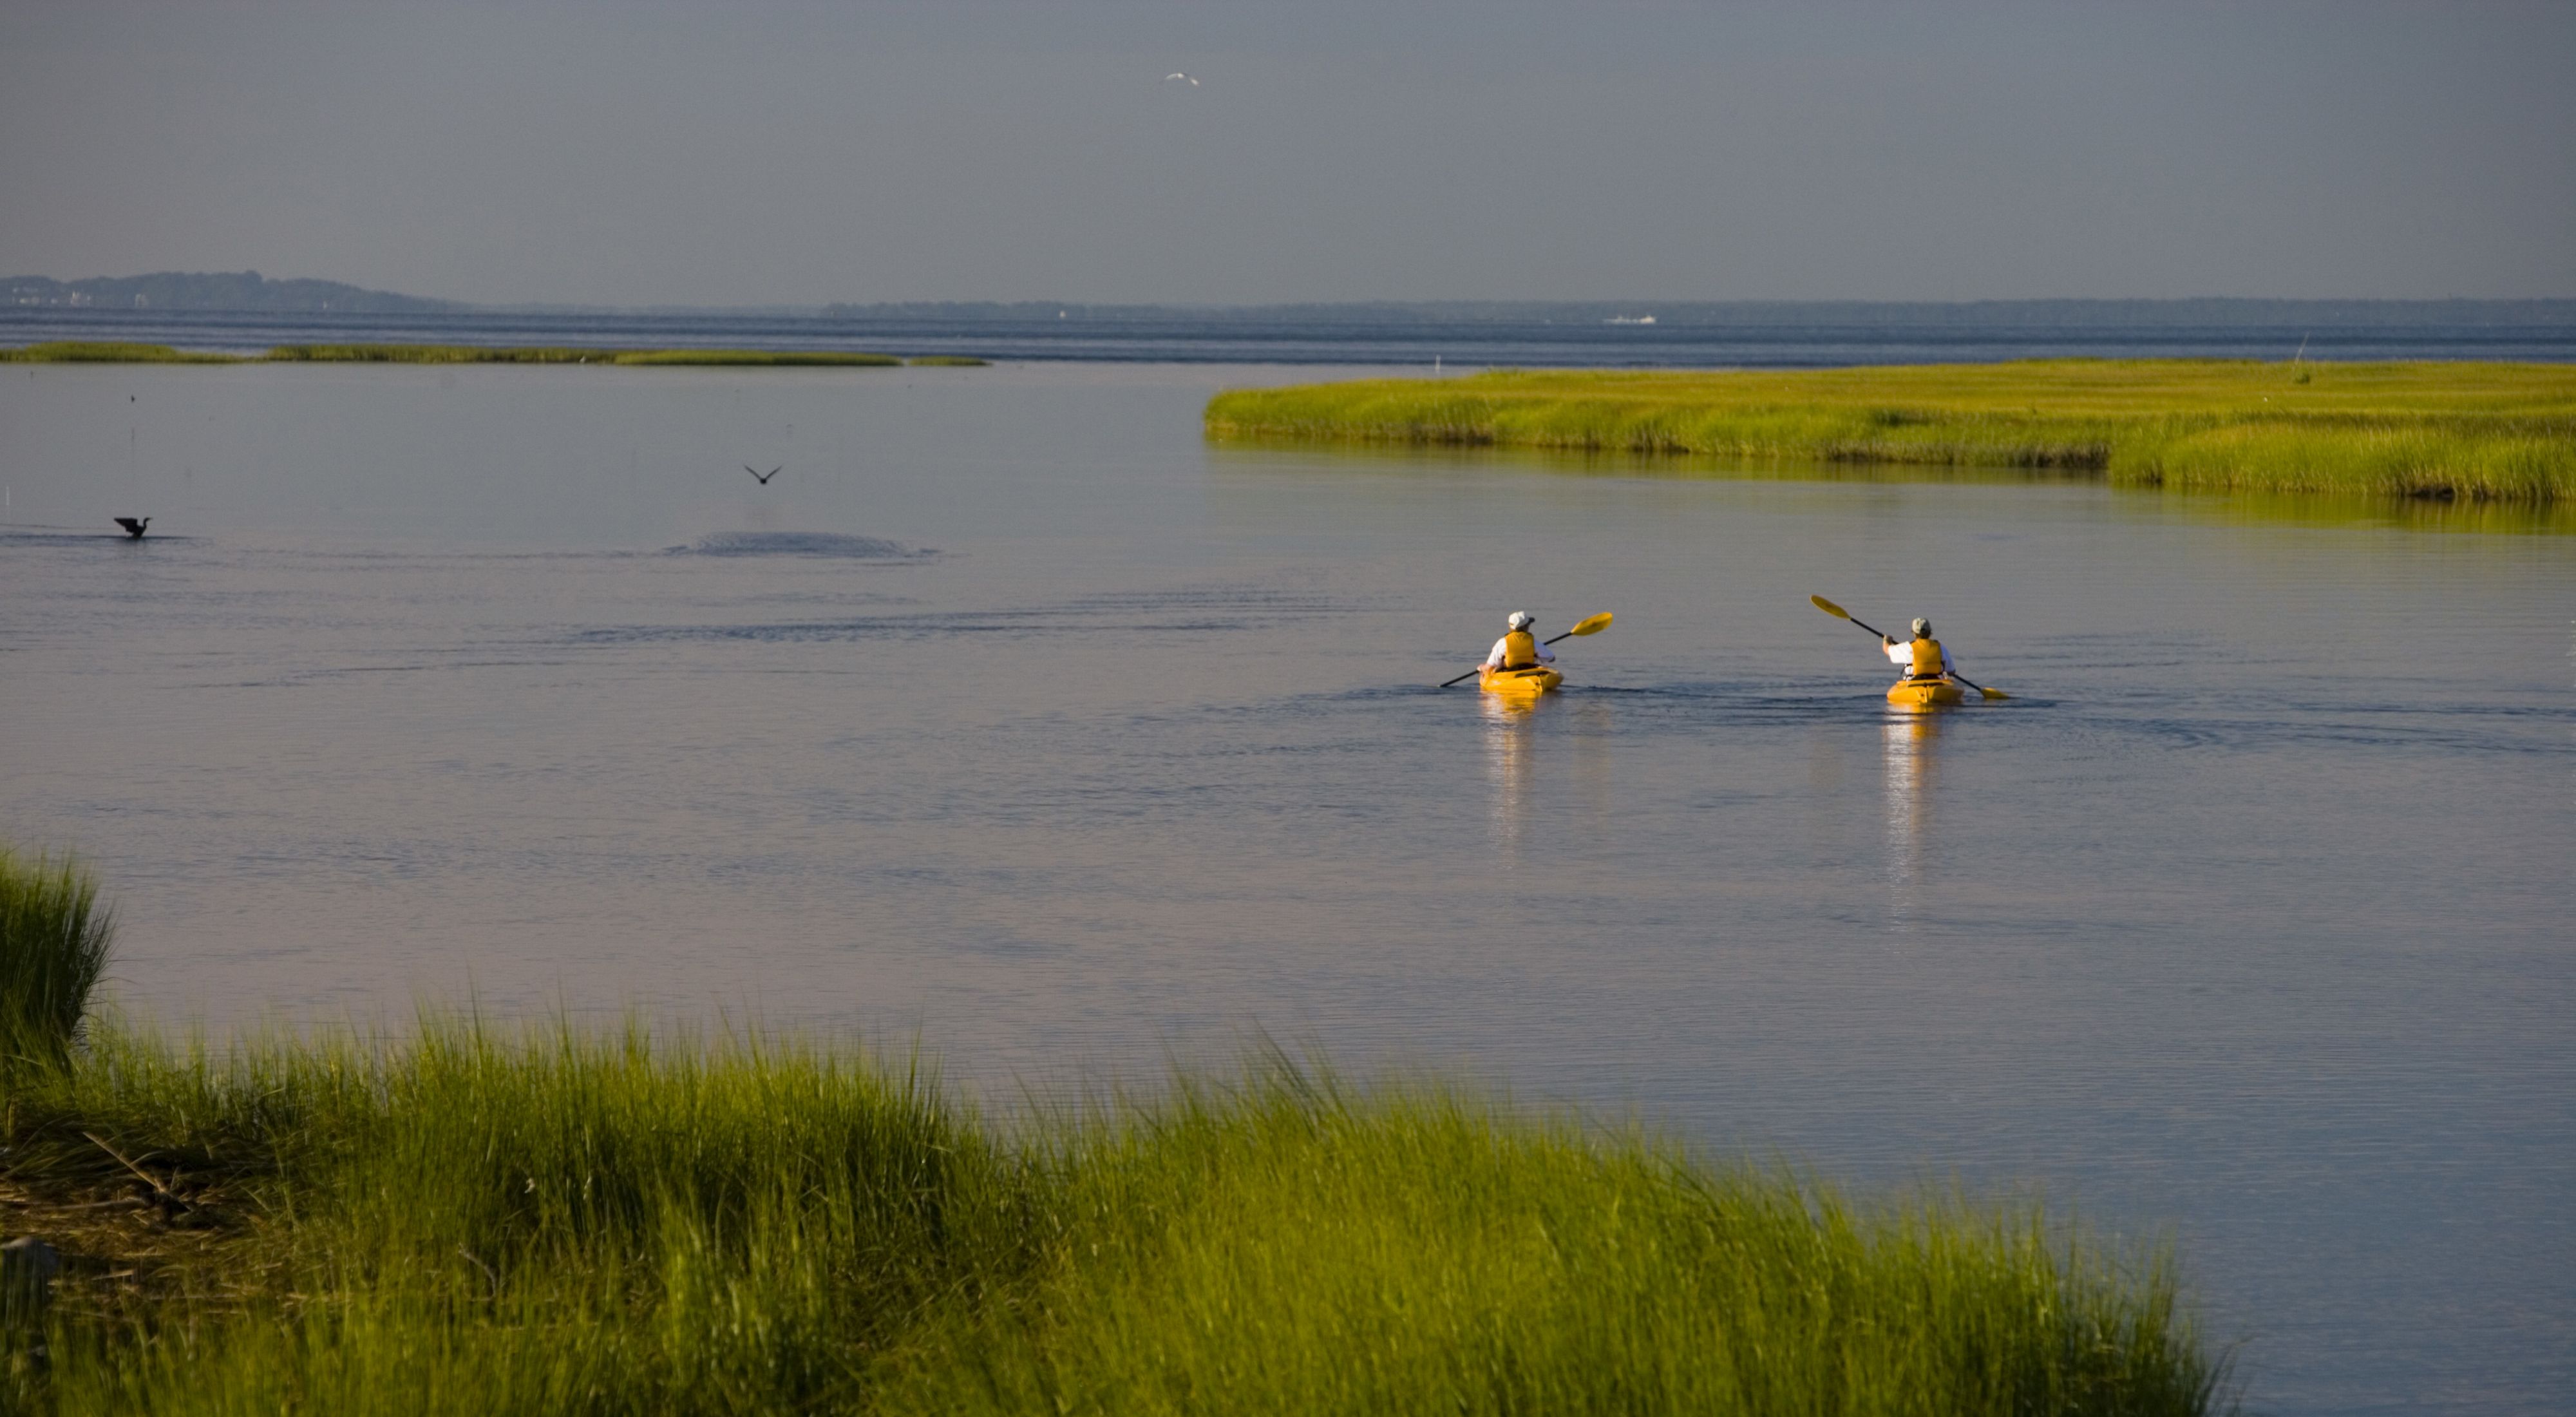 Two people in kayaks float along calm waters.